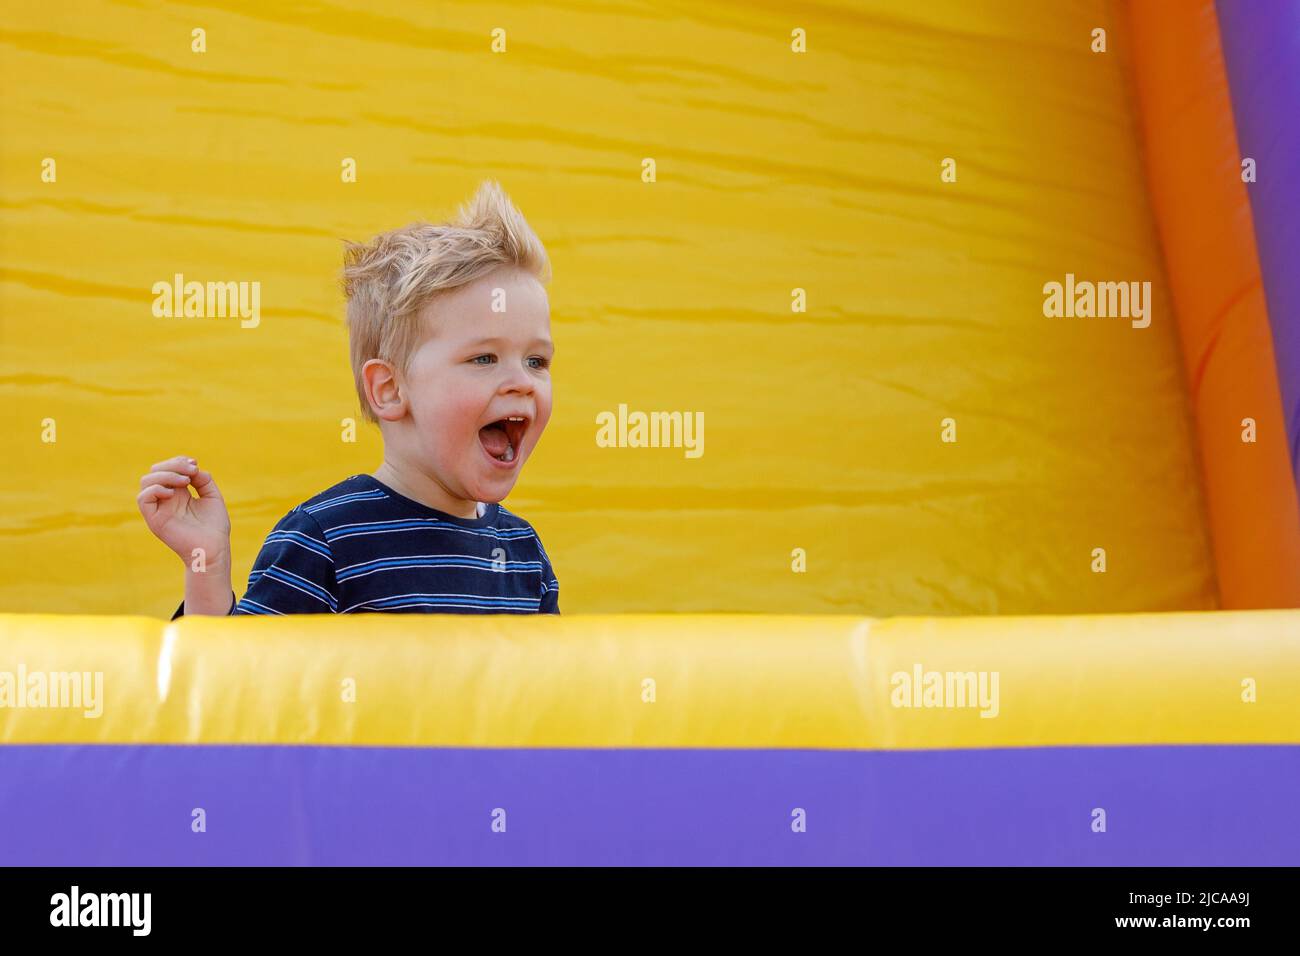 Little boy having fun in inflatable castle playground. Furious child shouts loudly. Bright yellow rubber trampoline background, there is free copy spa Stock Photo